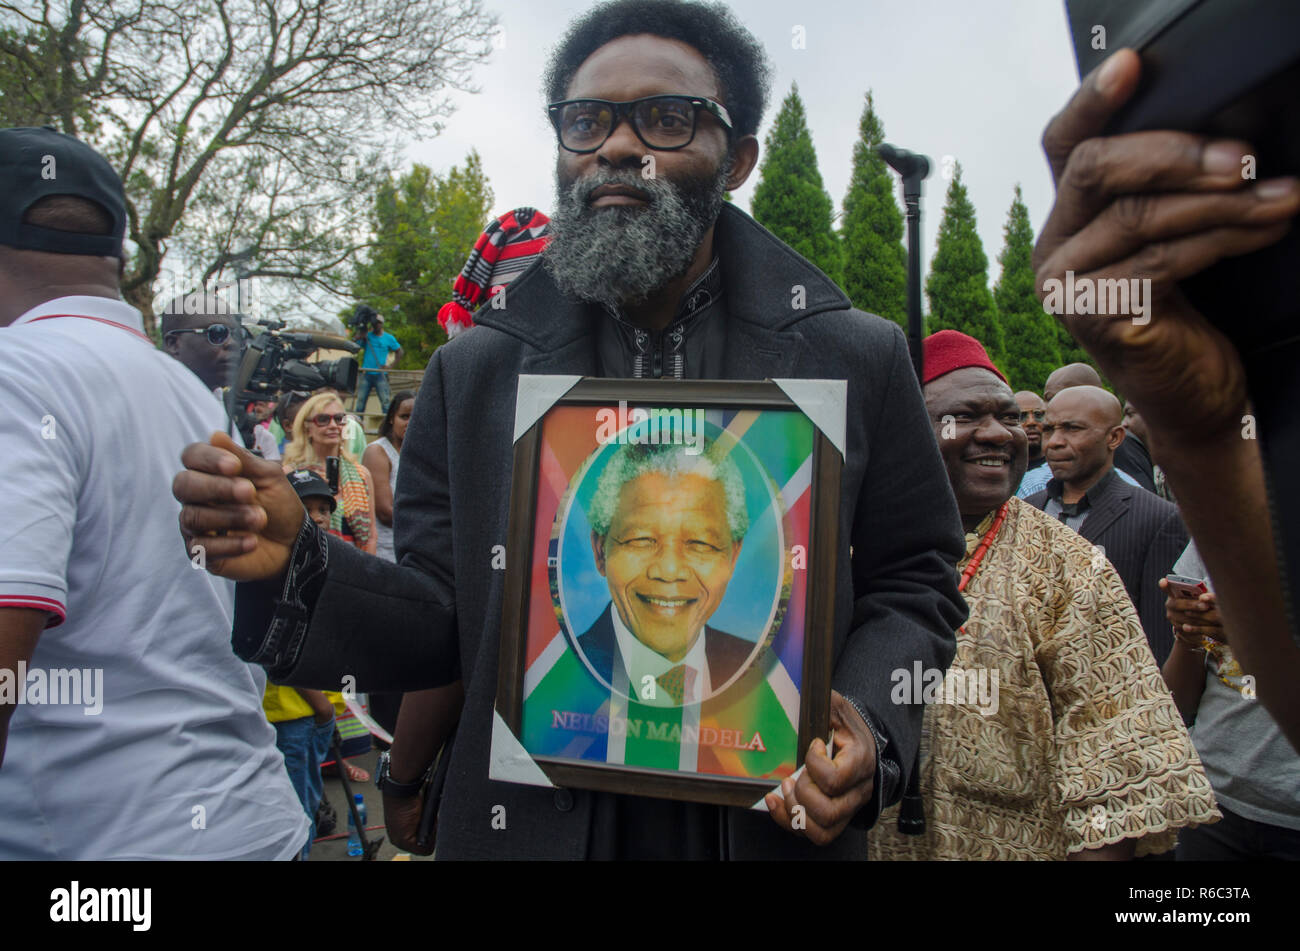 A man holds a picture of Nelson Mandela and a South African flag as thousands paid tribute to the former South African president, outside his home in Houghton, Johannesburg, South Africa, on December 9, 2013. Scores of people gathered at the site over the weekend. The elder statesman died Thursday, December 5, 2013. PHOTO: EVA-LOTTA JANSSON Stock Photo